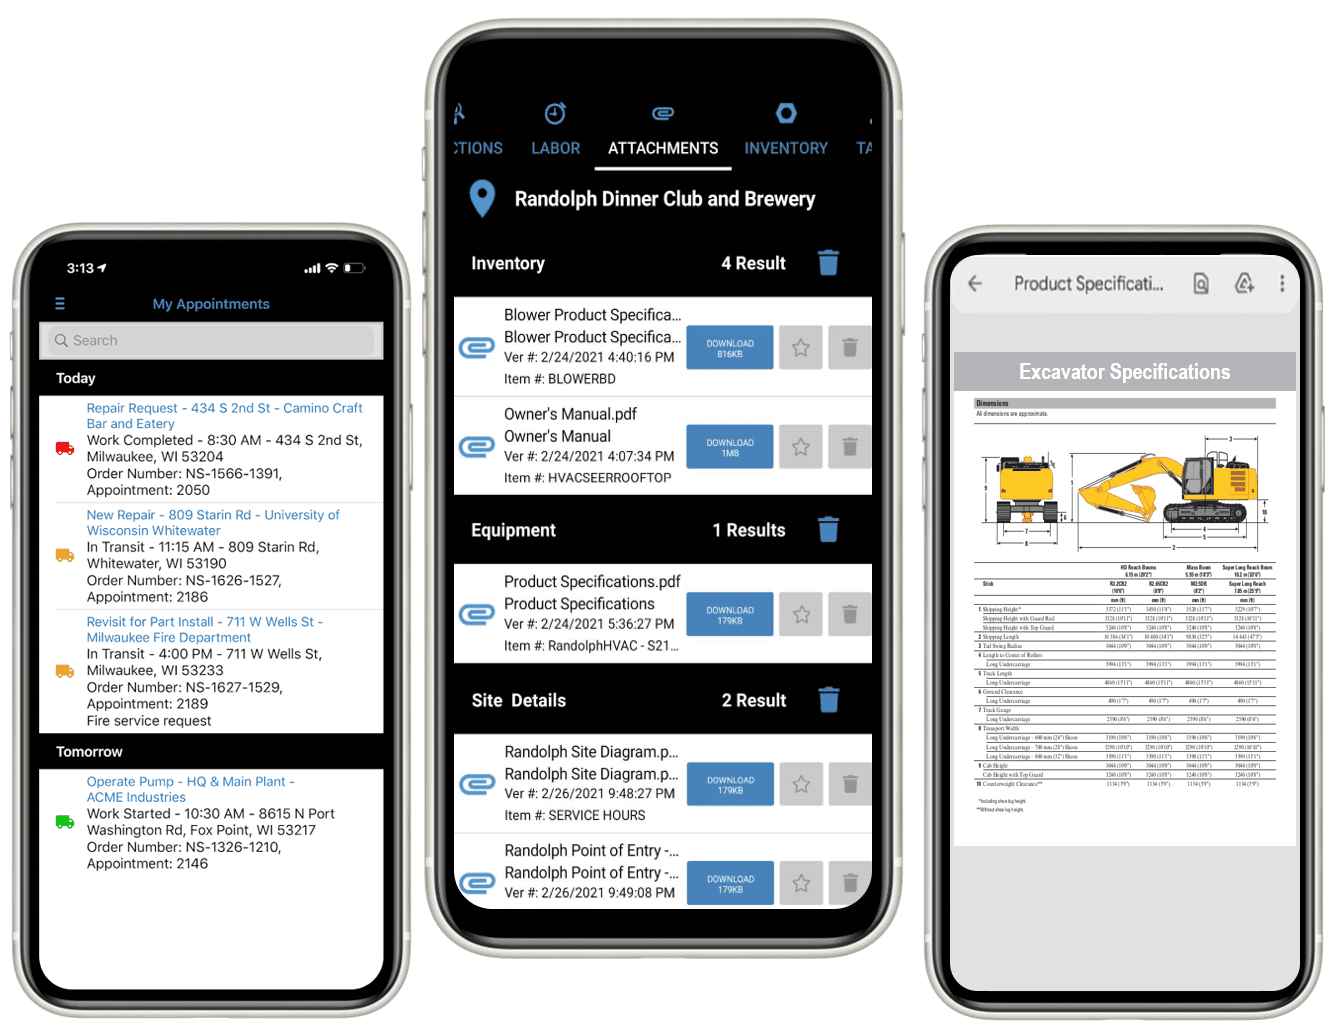 MSI's Service Pro Mobile app for field service management